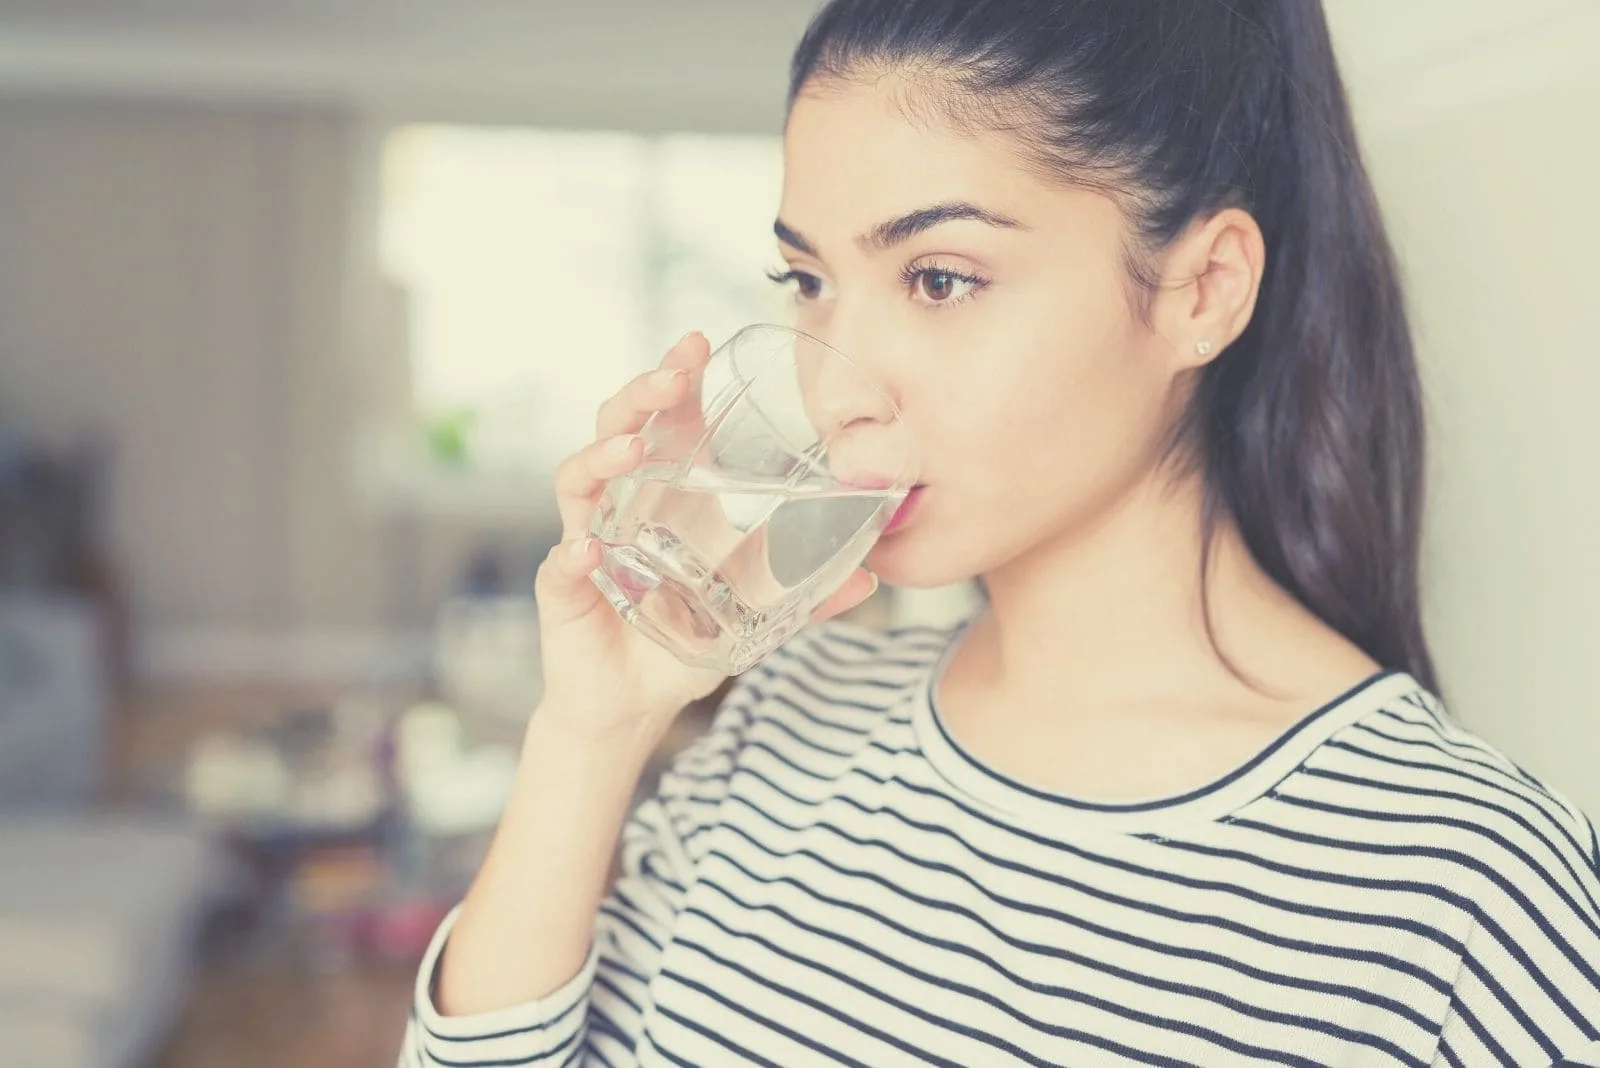 woman drinking water while thinking deeply 